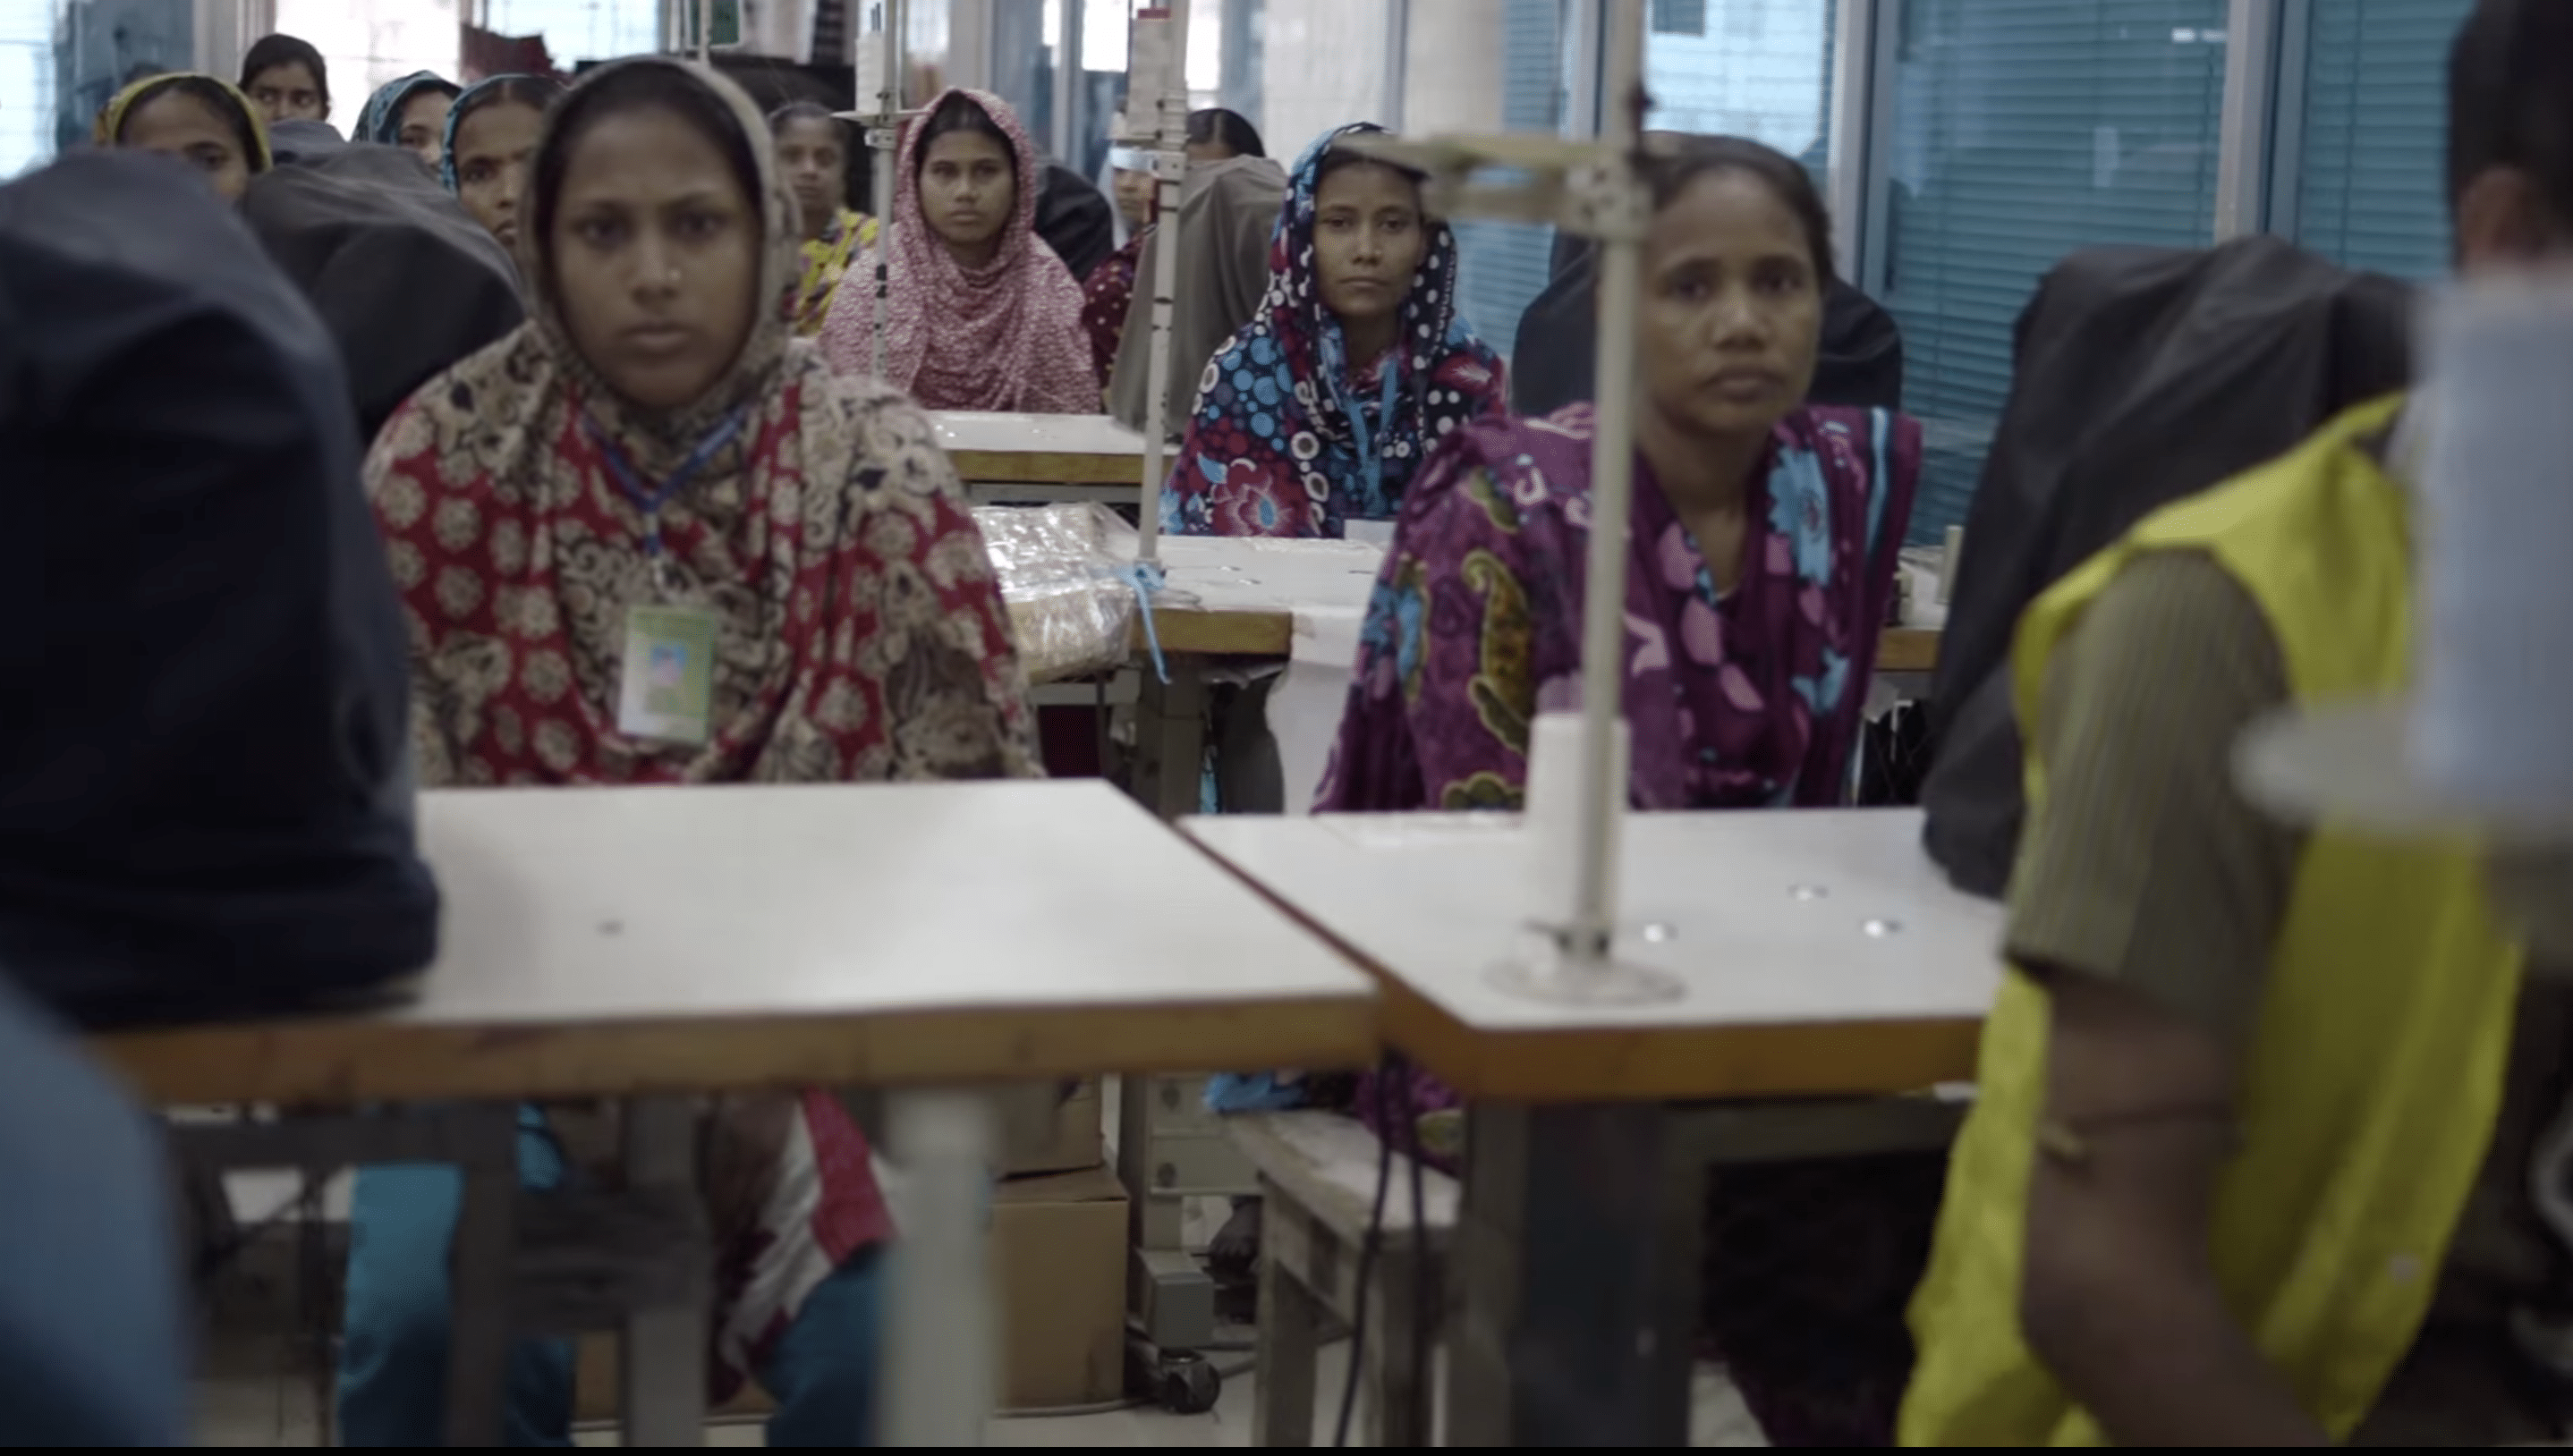 Factory scene from groundbreaking new documentary film ‘The True Cost’ which the explores shocking cost of Fast Fashion